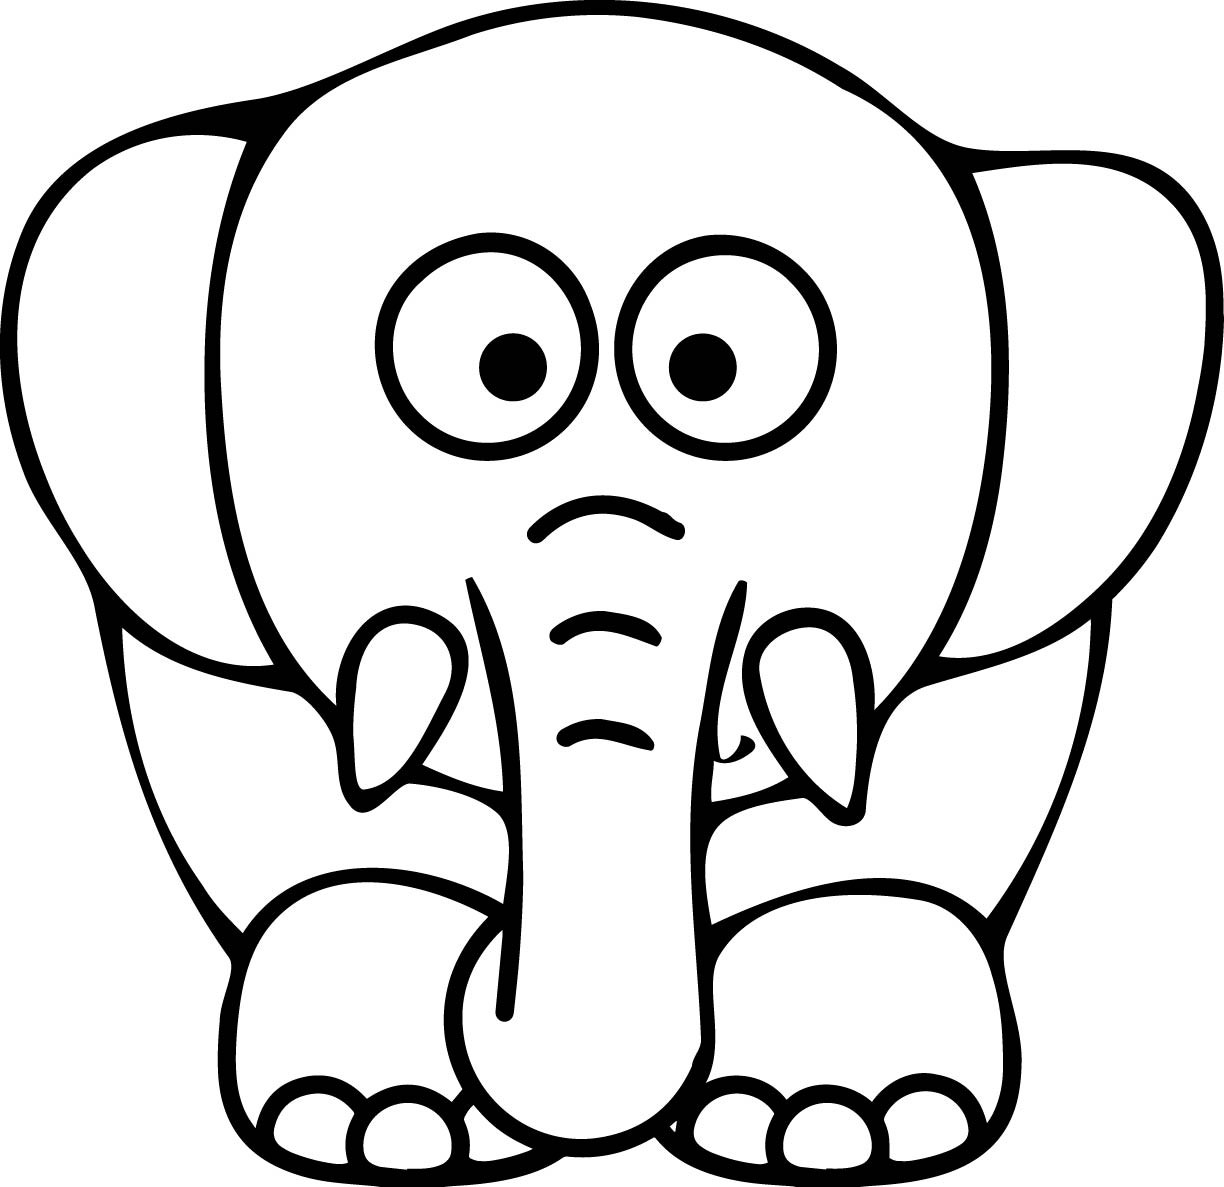 Elephants Coloring Pages
 Black beauty 18 Elephant coloring pages